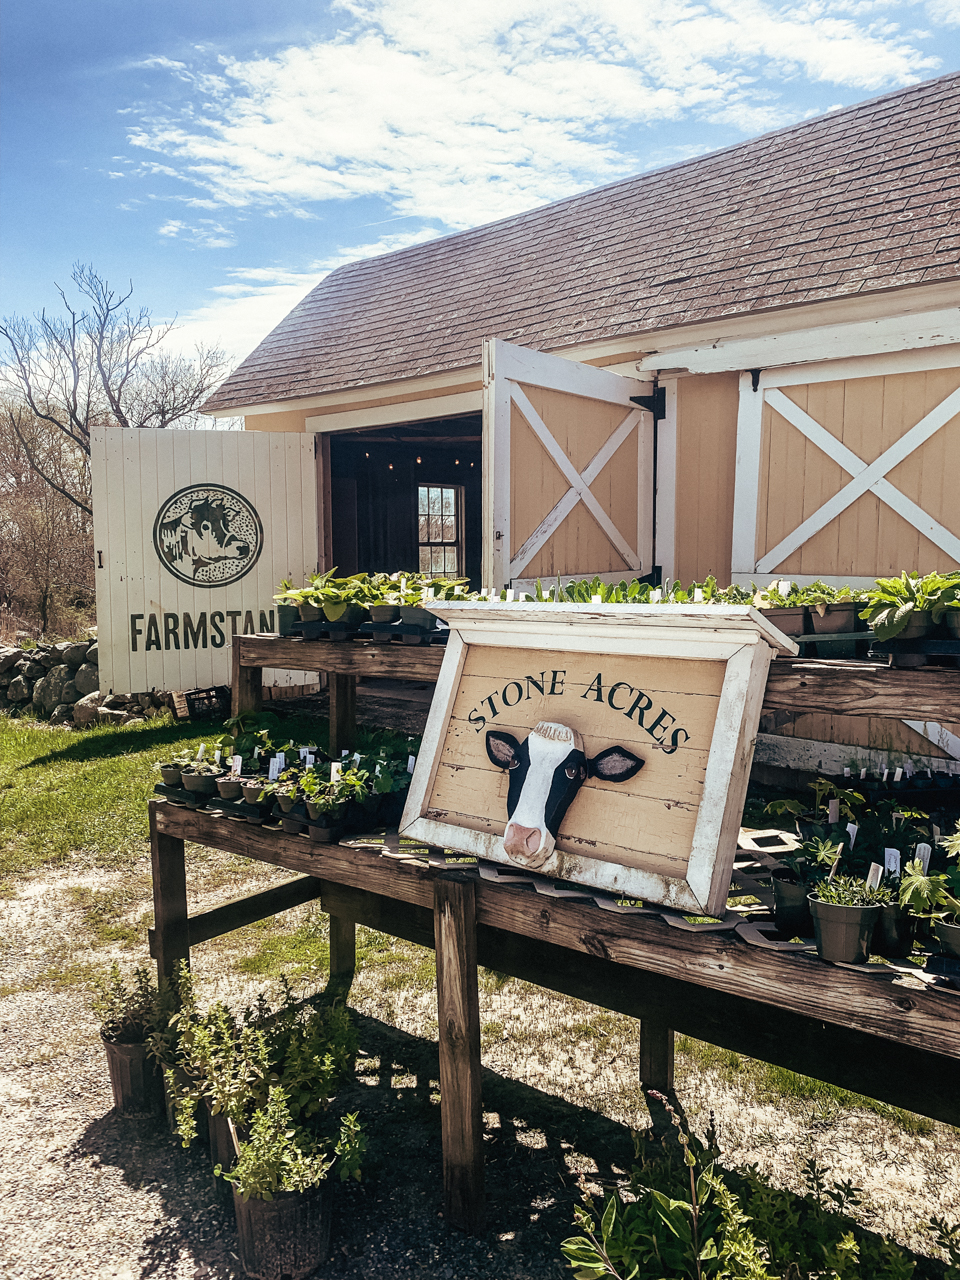 Top 10 Things to Do in Stonington CT on your Weekend Getaway featured by top US travel blogger, Shannon Shipman: image of stone acres farm